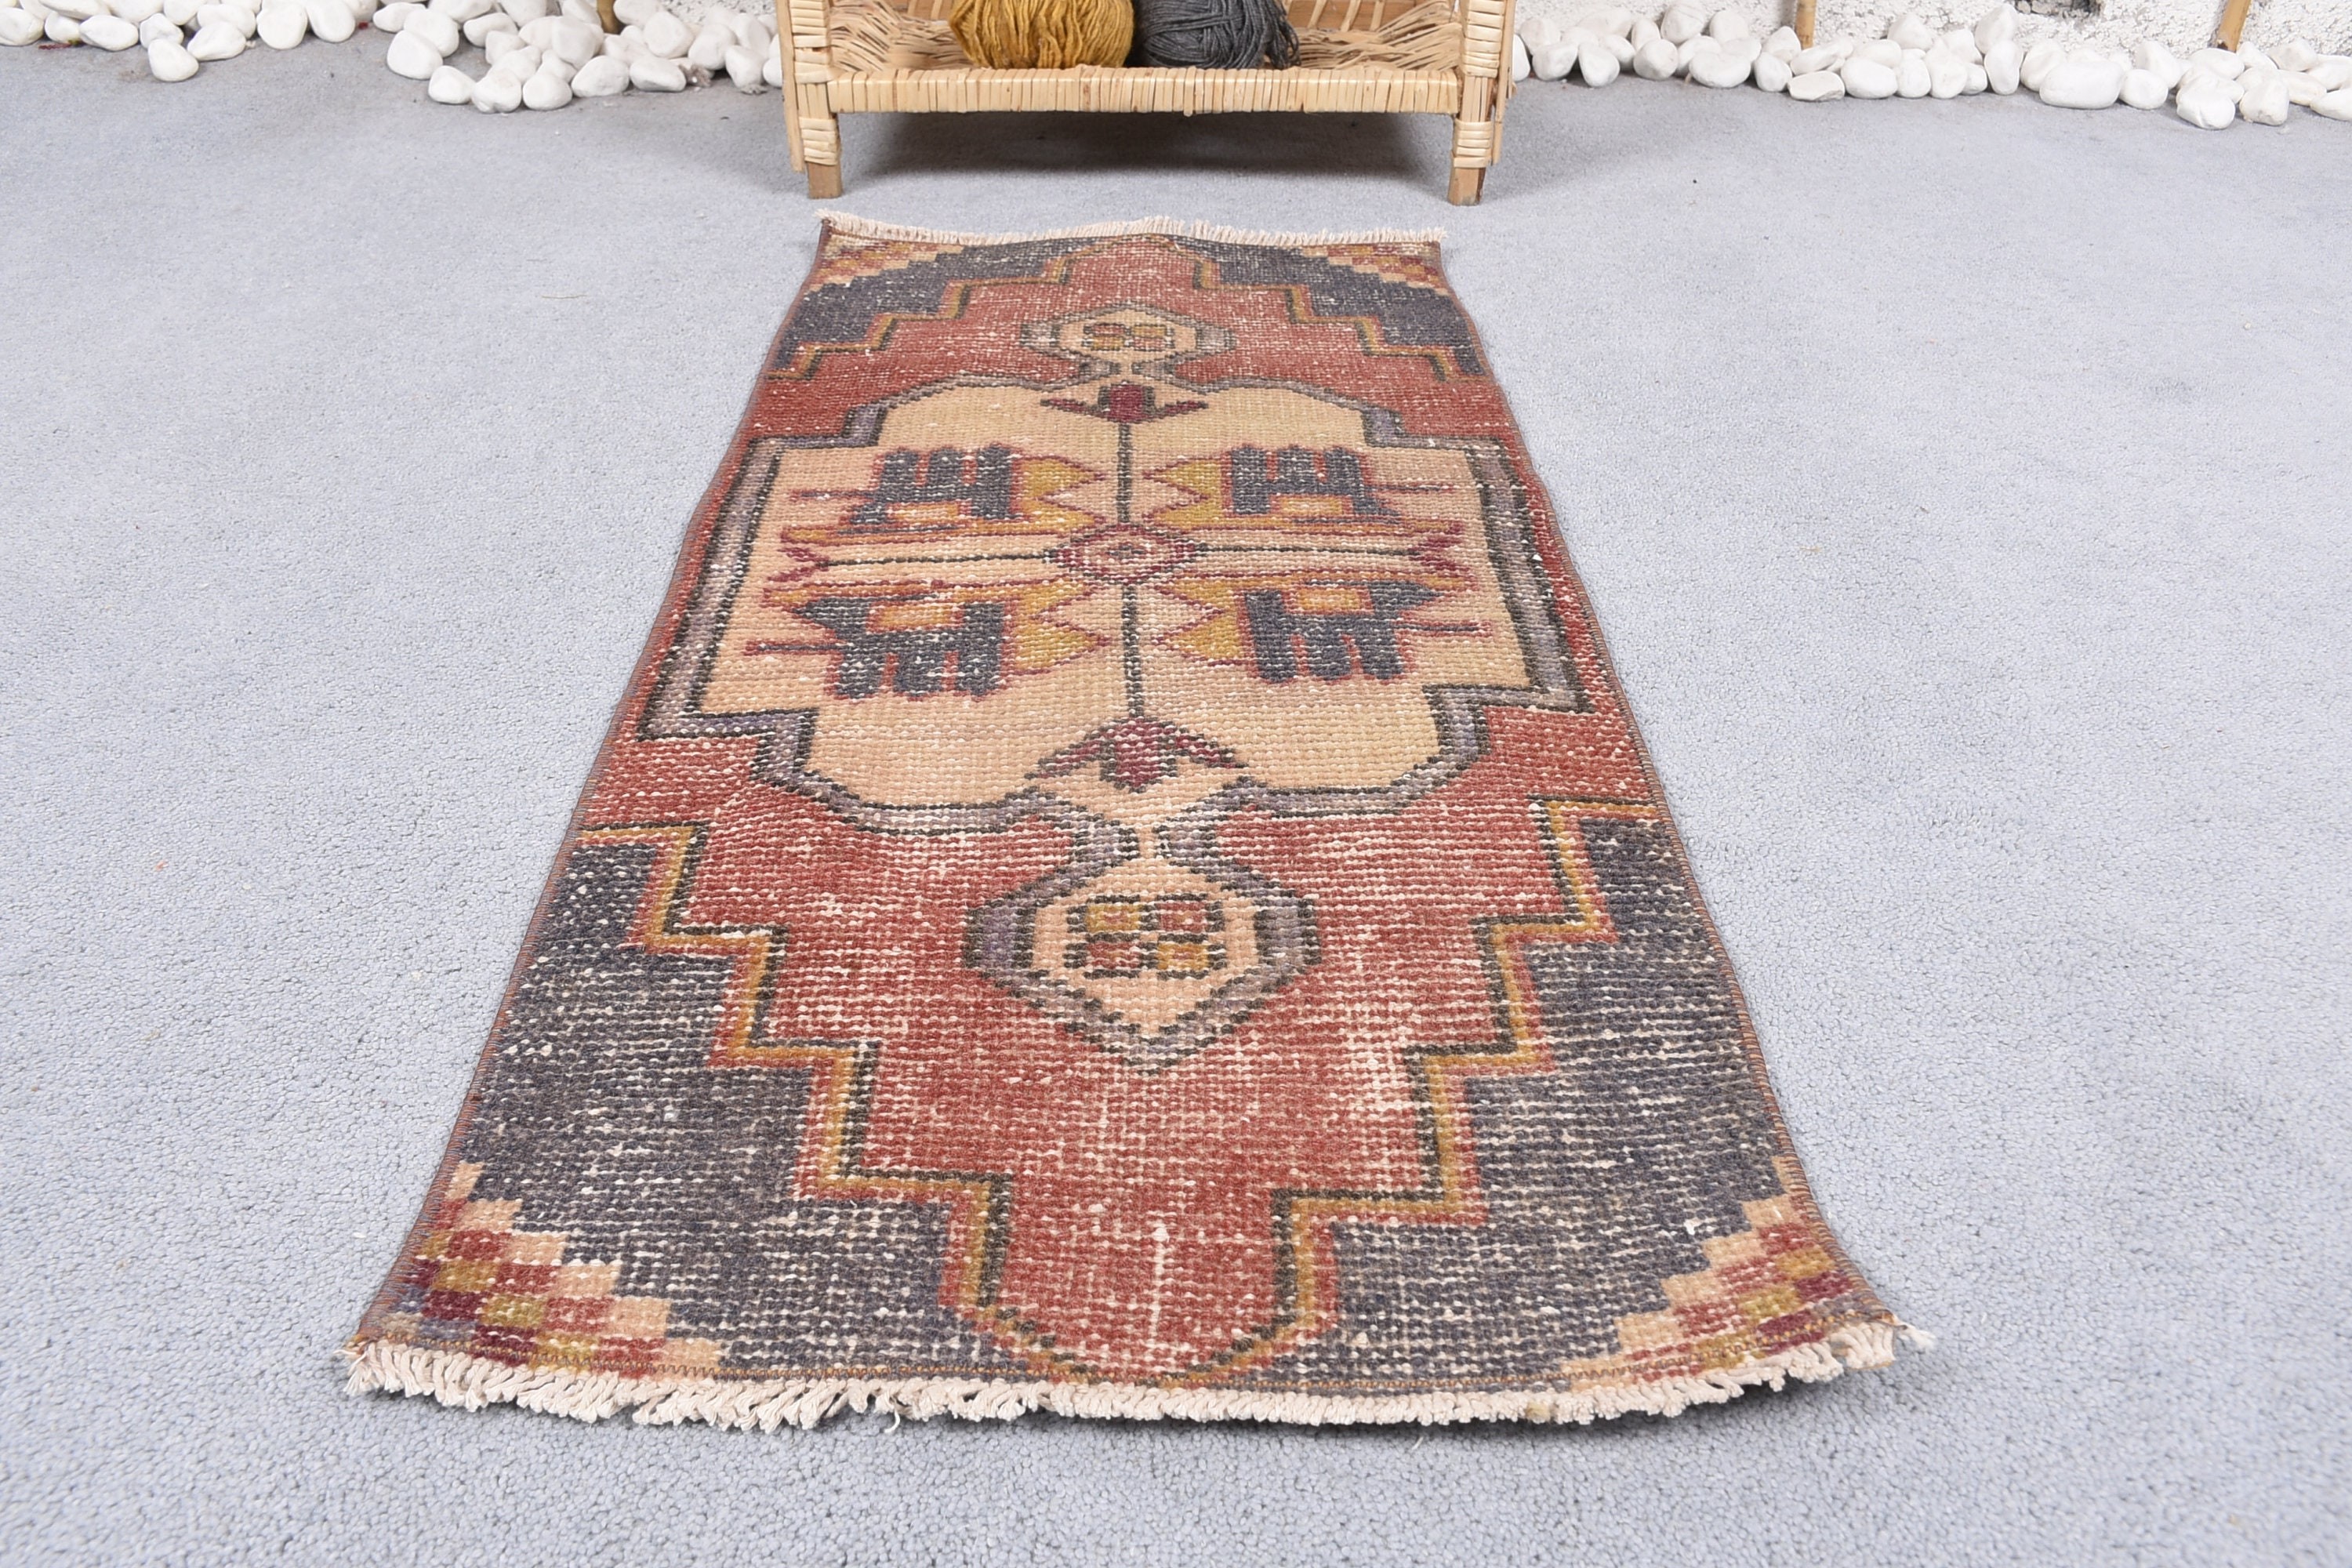 1.3x3 ft Small Rug, Bath Rug, Red Home Decor Rugs, Wool Rug, Car Mat Rugs, Antique Rugs, Turkish Rug, Rugs for Wall Hanging, Vintage Rug